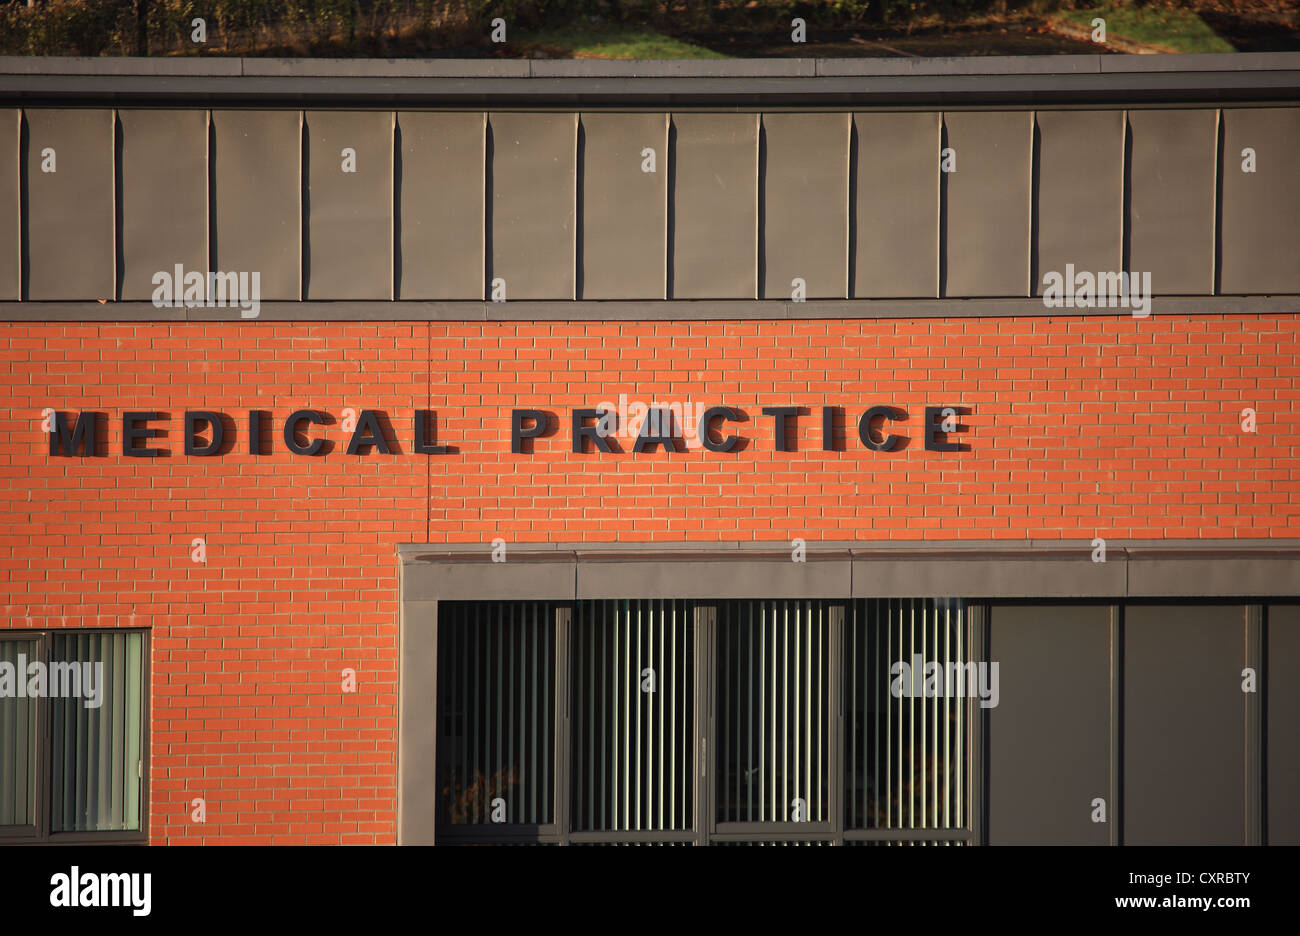 Medical Practice or doctors surgery building Stock Photo